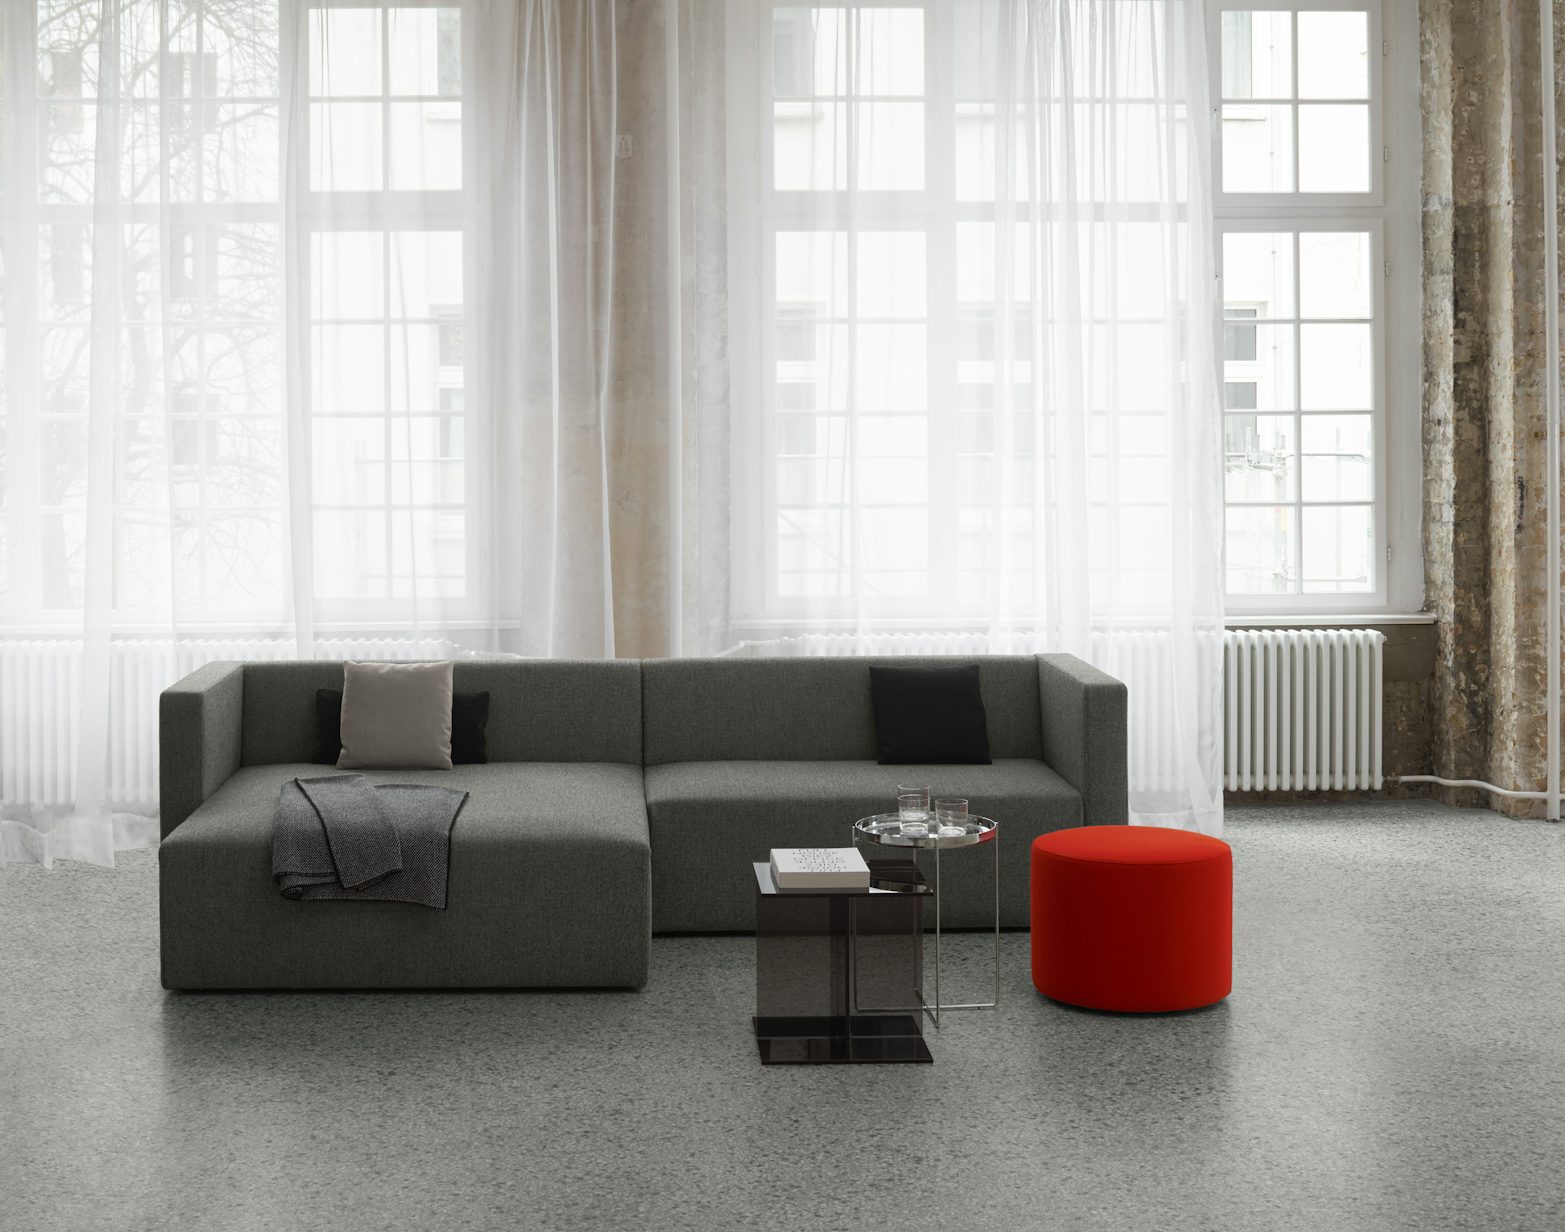 drei table with kerman sofa and habibi table in large modern room e15 furniture